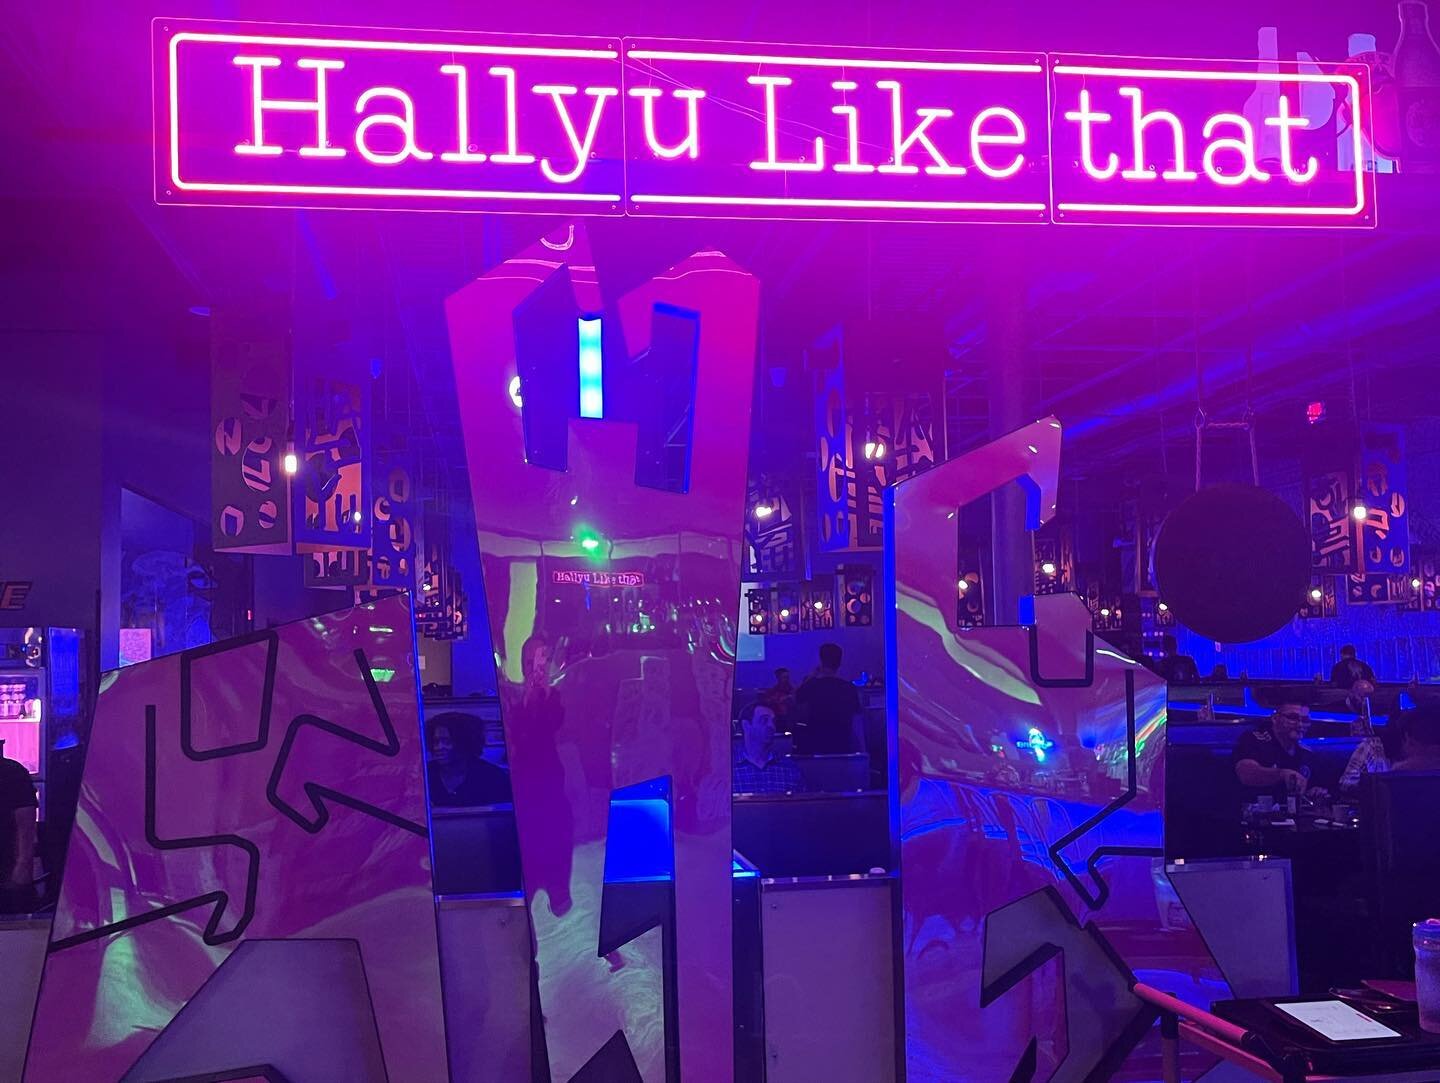 Found this GEM of a place to satisfy my Korean BBQ craving.  @hallyukbbq  was such a wonderful experience tonight and our server was friendly and kind. Oh and there&rsquo;s #karaoke in the back! #hallyukbbq #koreanbbq in #fortlauderdale #datenightide